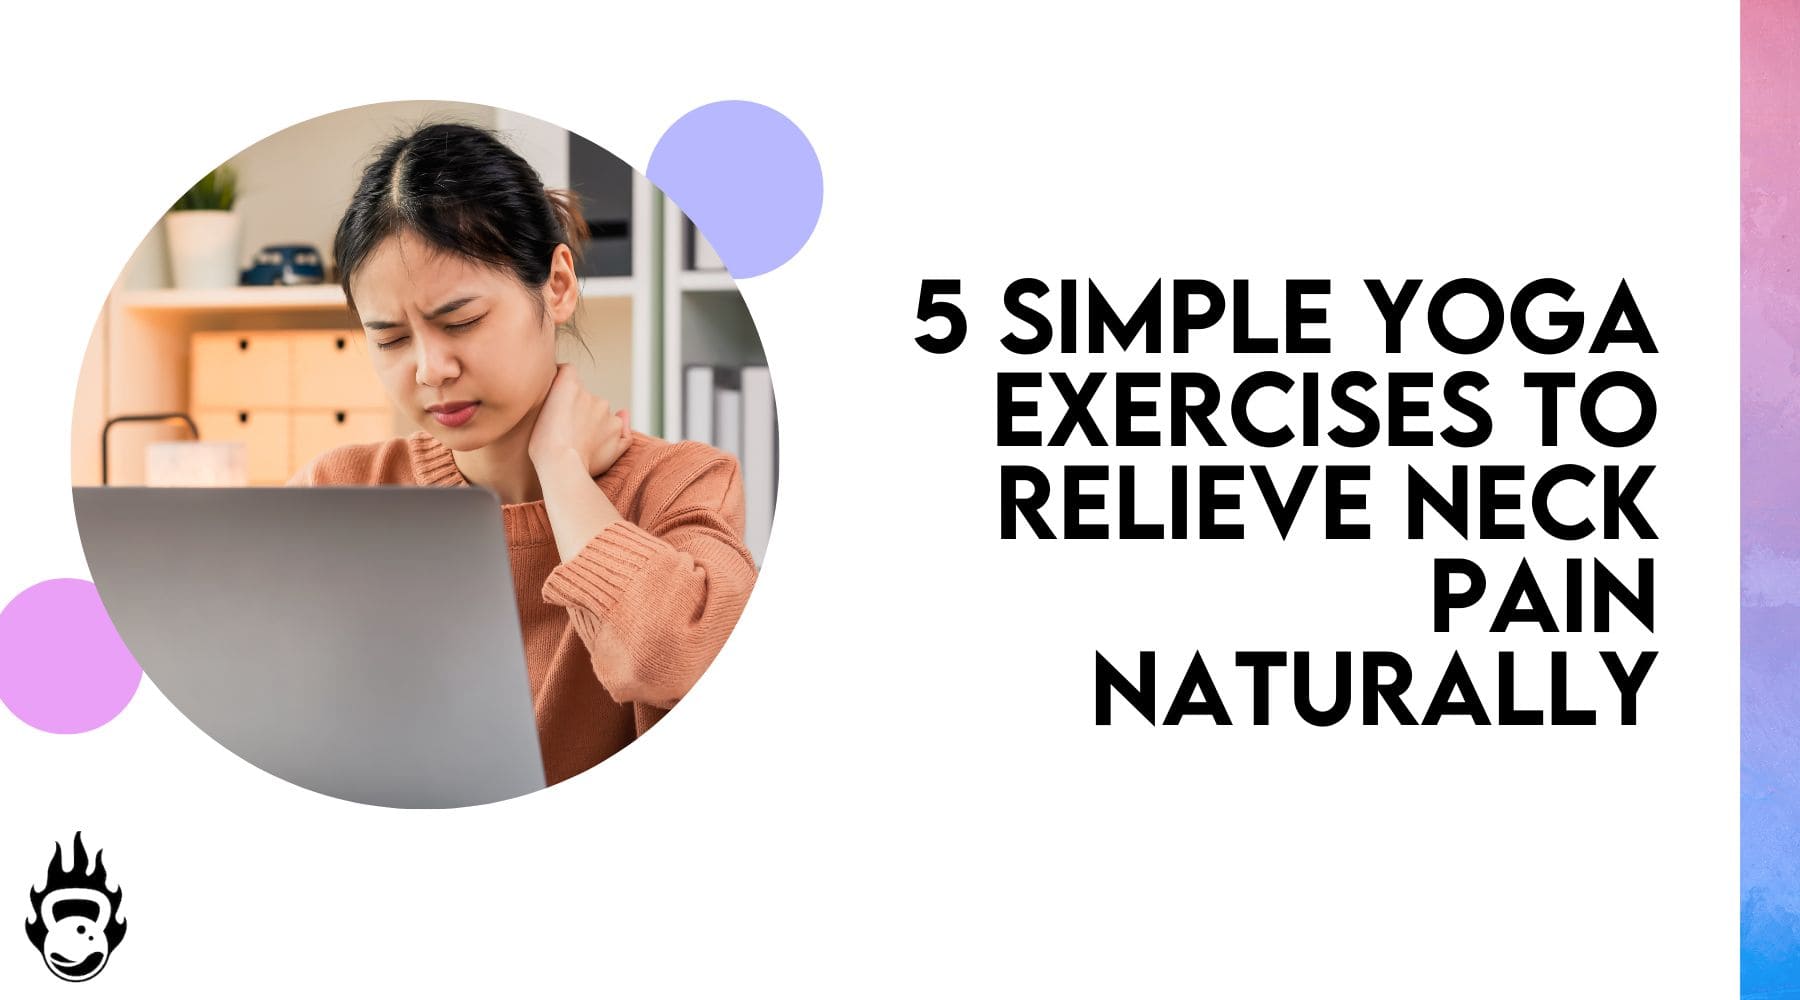 Neck Pain Relief Exercises in 5 min 